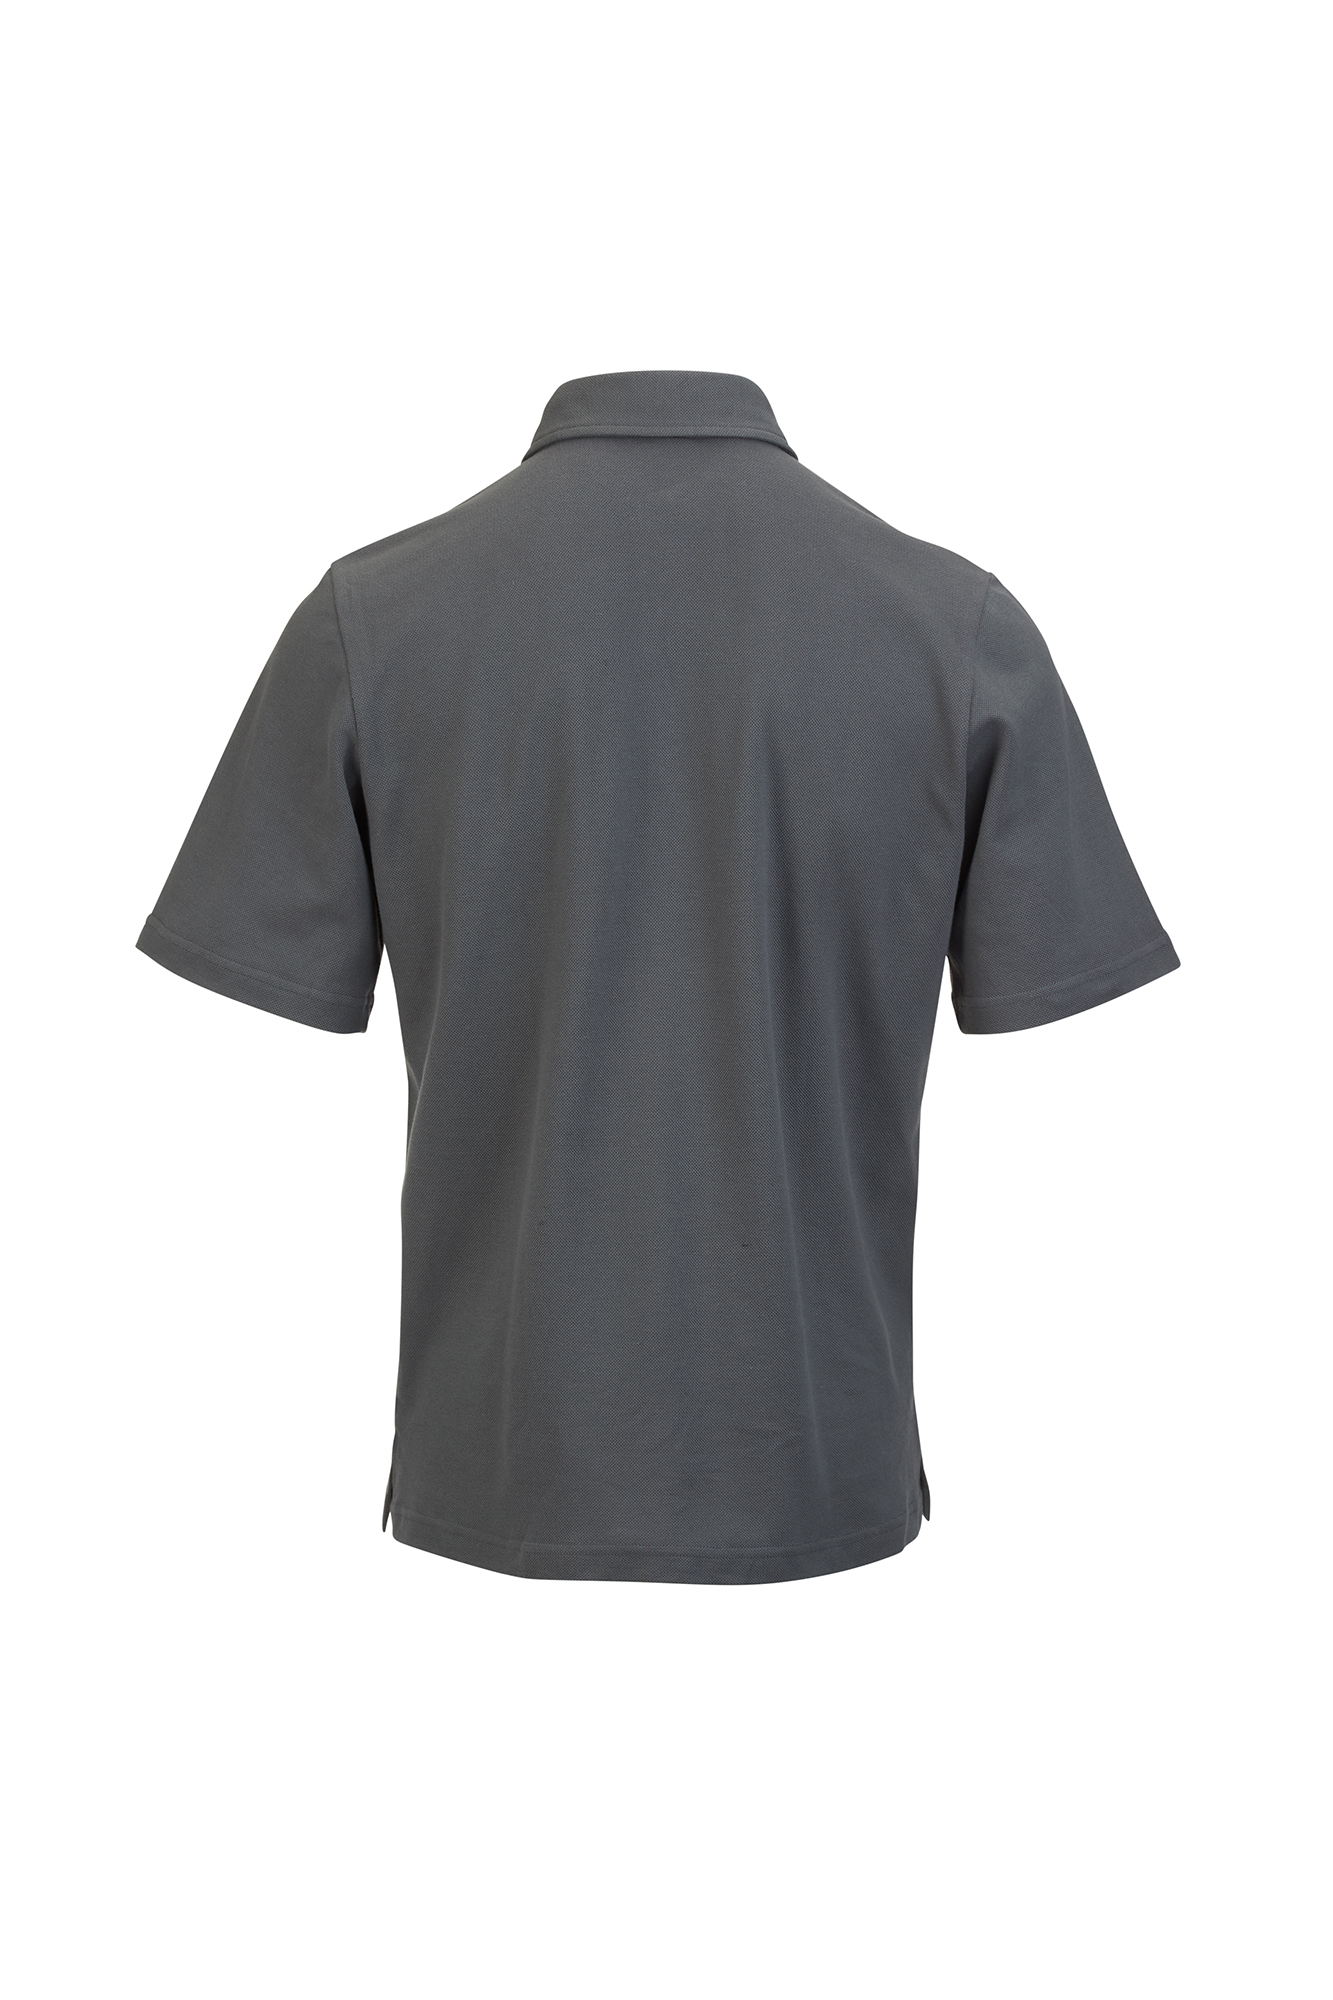 Cotton Polo Shirt | Loop Workwear NZ | Natural Cotton Work Polos